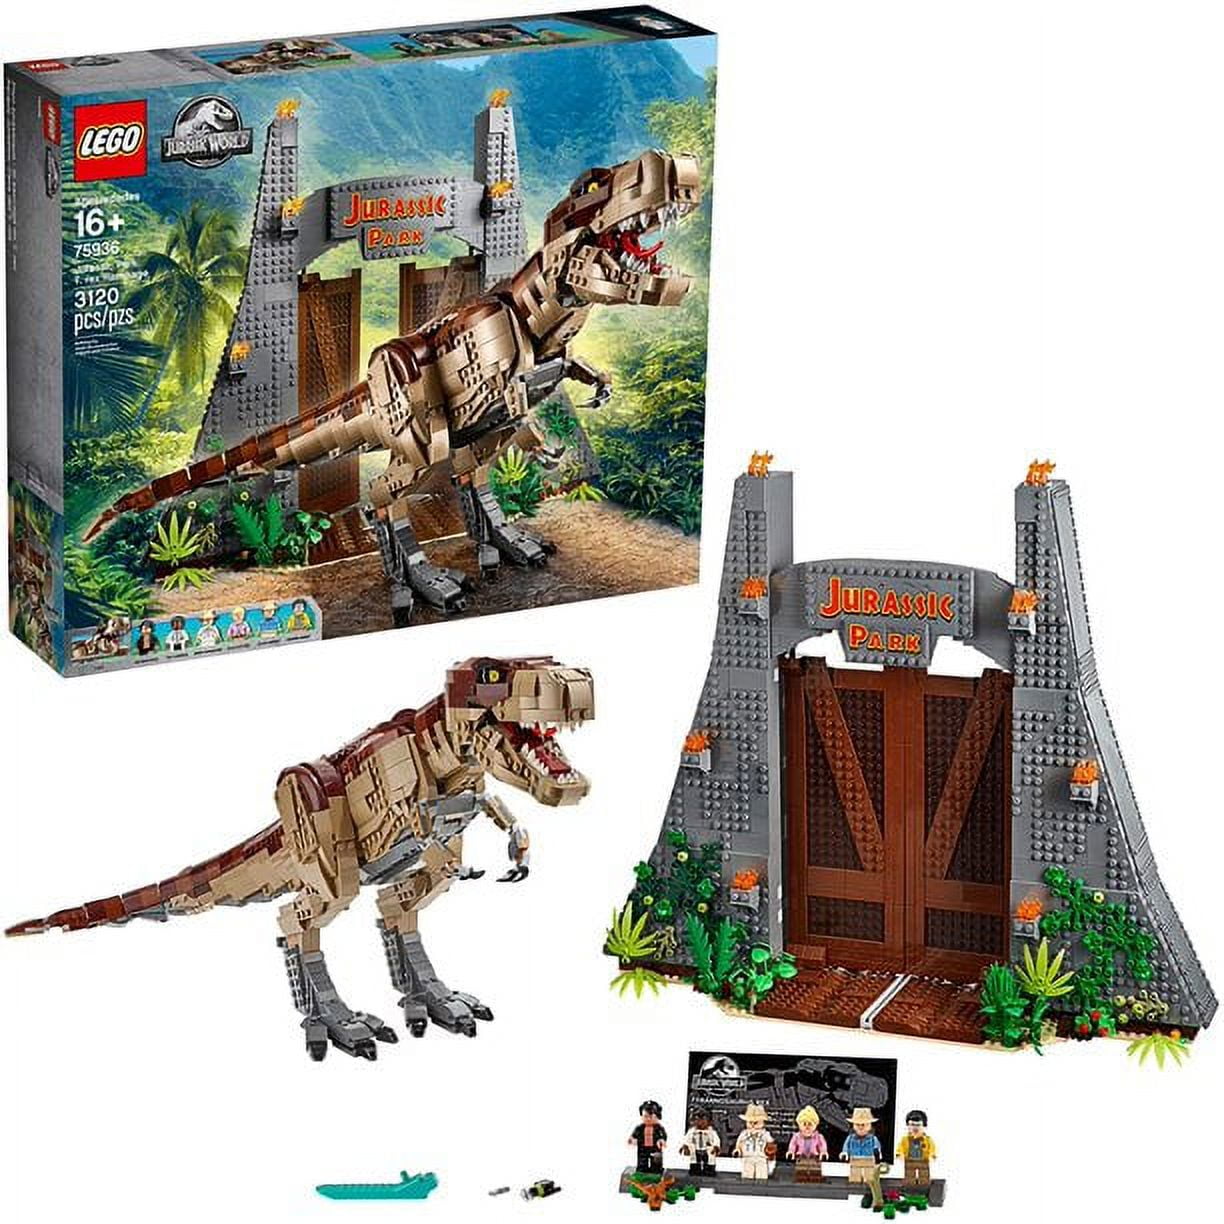 Building Kit Lego Jurassic World - T-Rex Escape, Posters, gifts,  merchandise